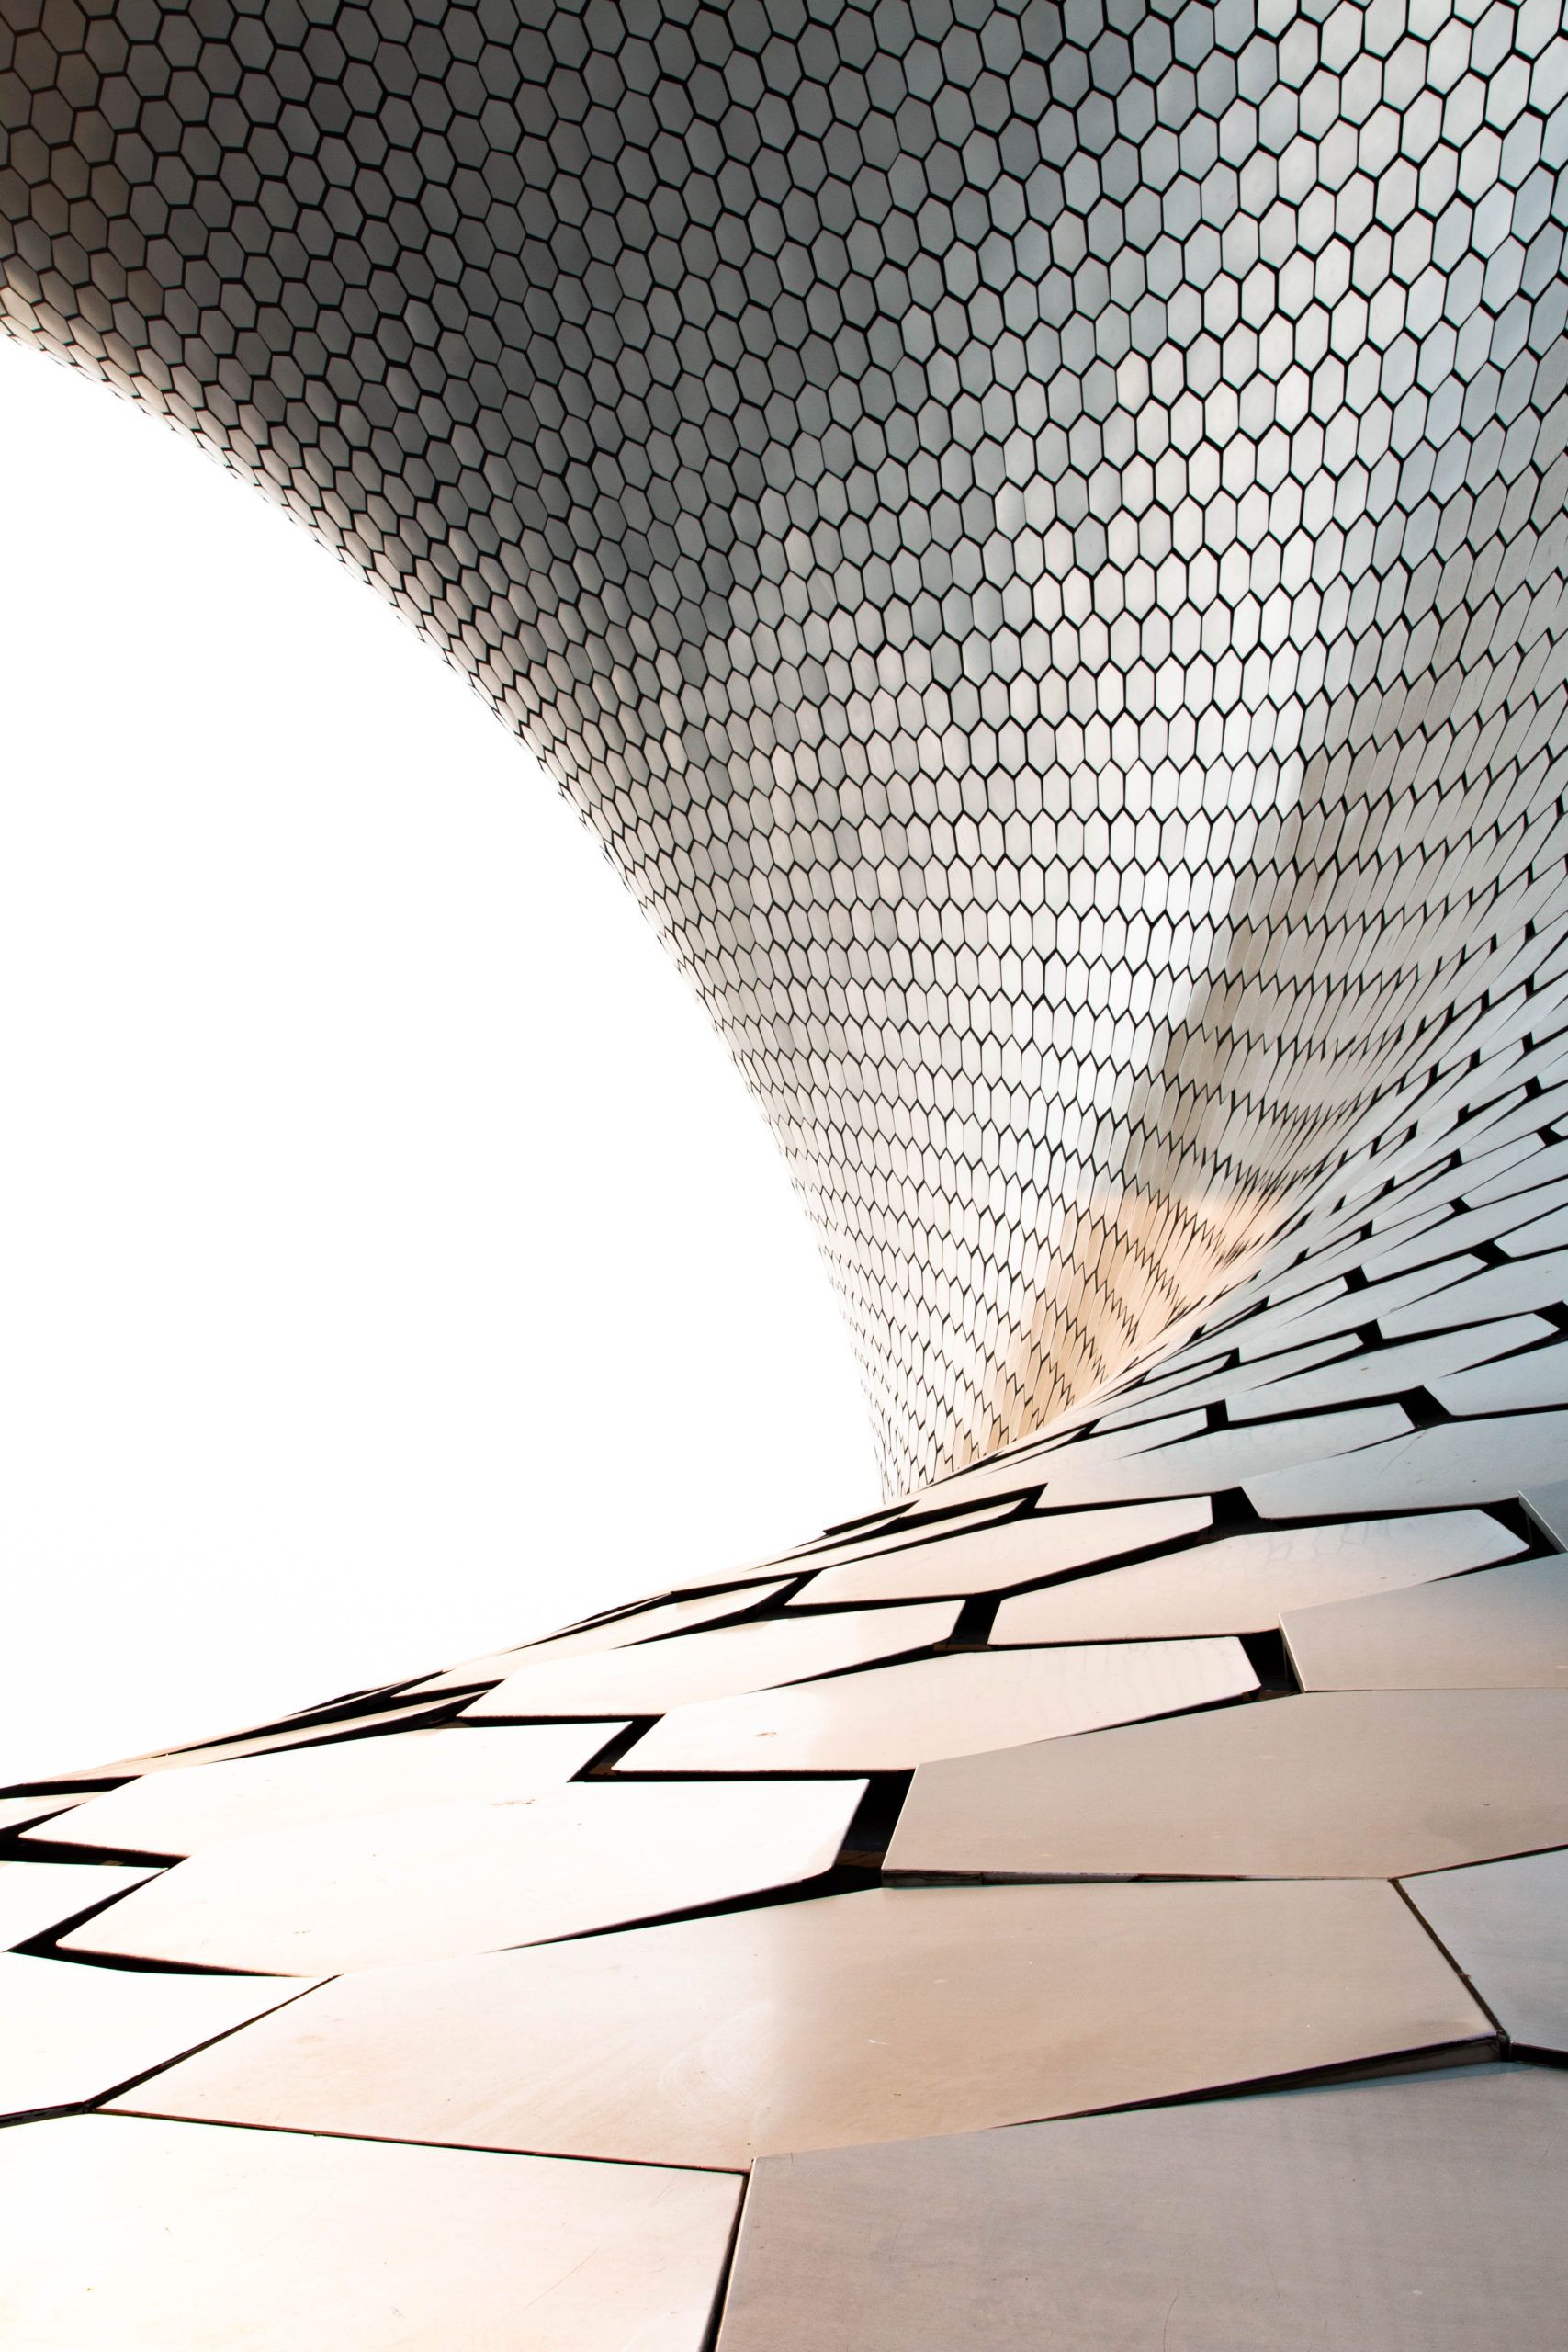 Museo Soumaya, one of many must-visit museums in Mexico city, CDMX